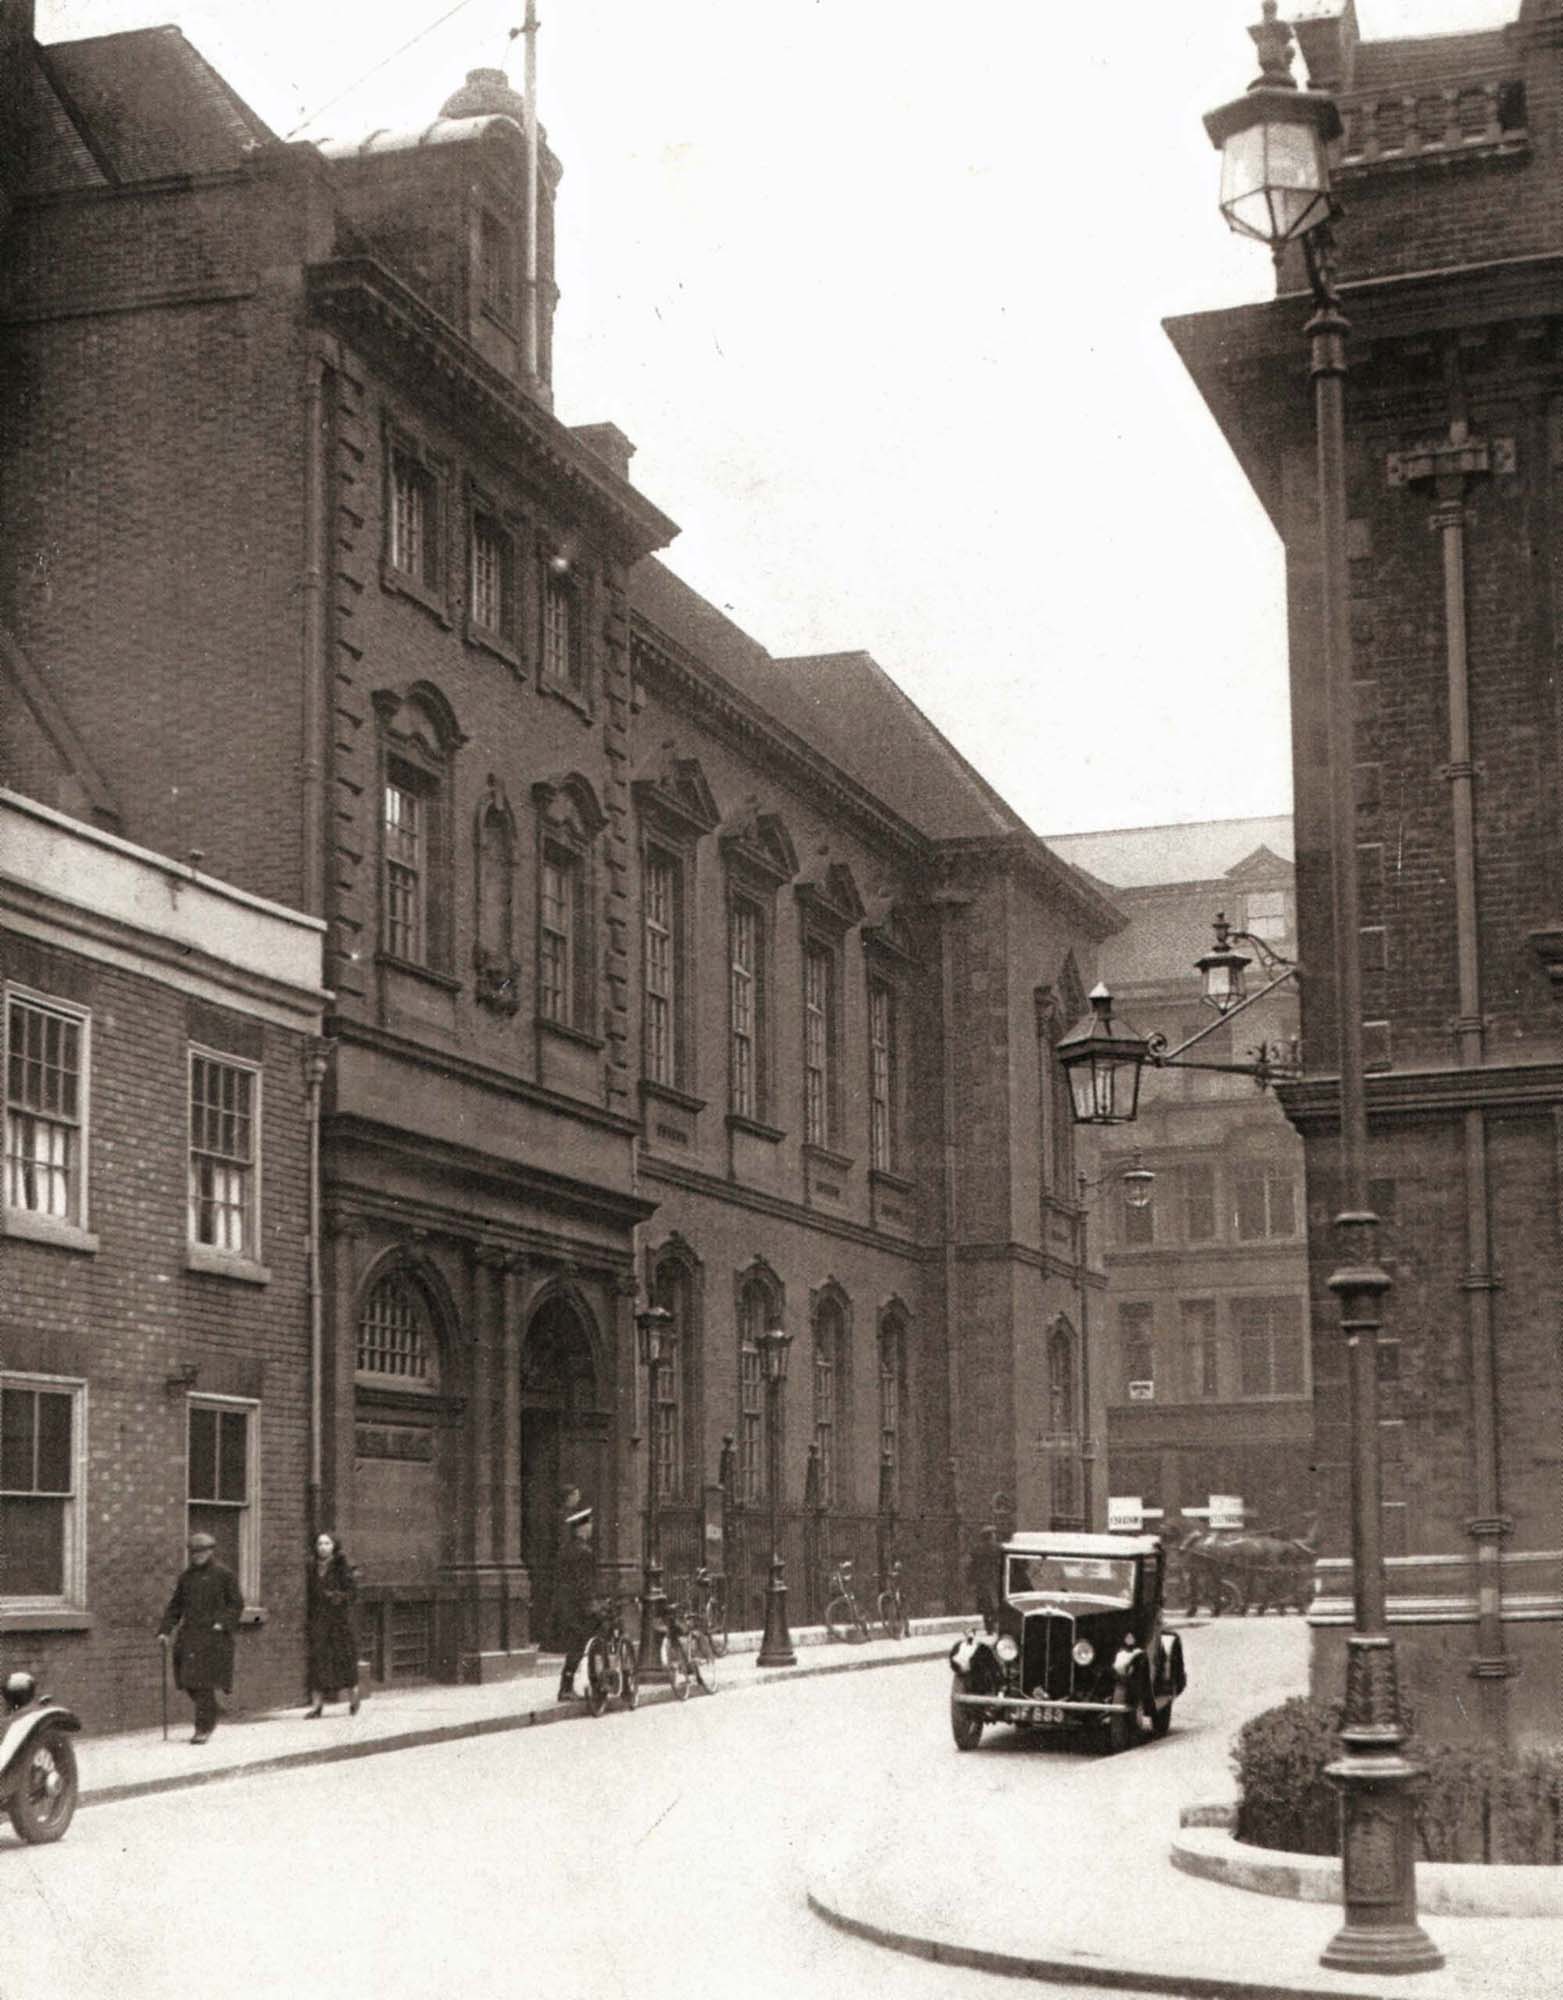 The Library and Bishop Street in 1930 - 